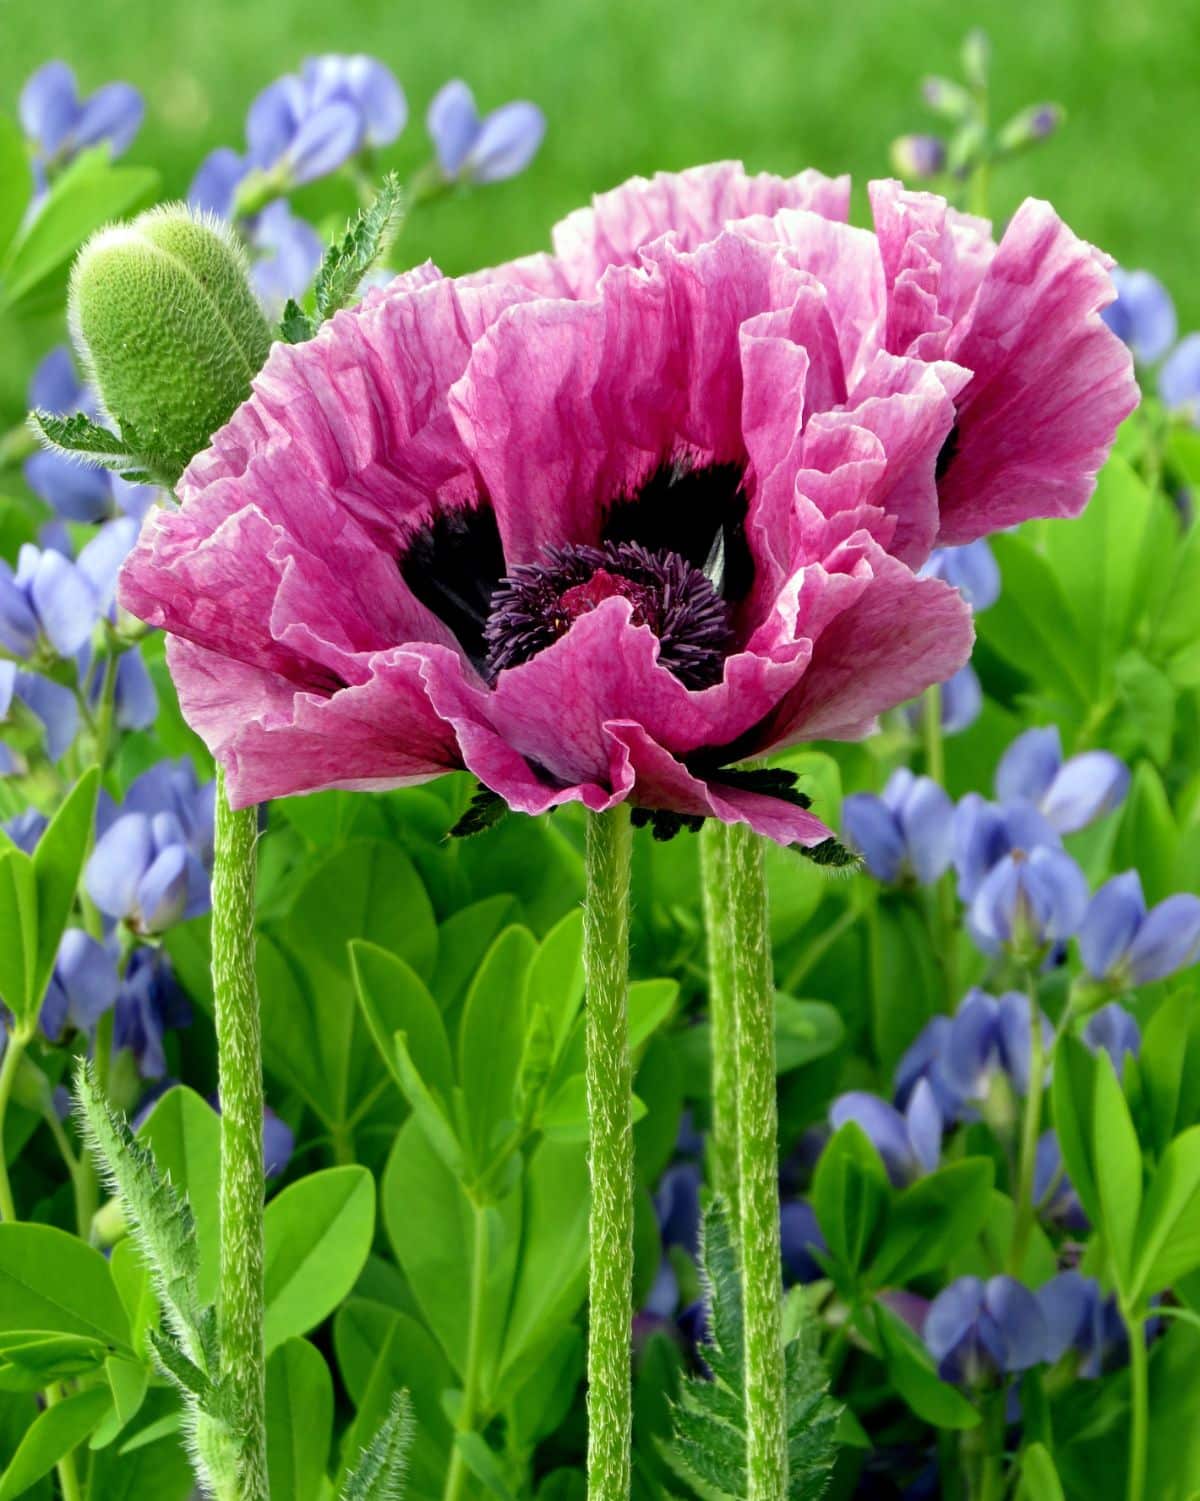 Deep pink colored oriental poppies started from seed